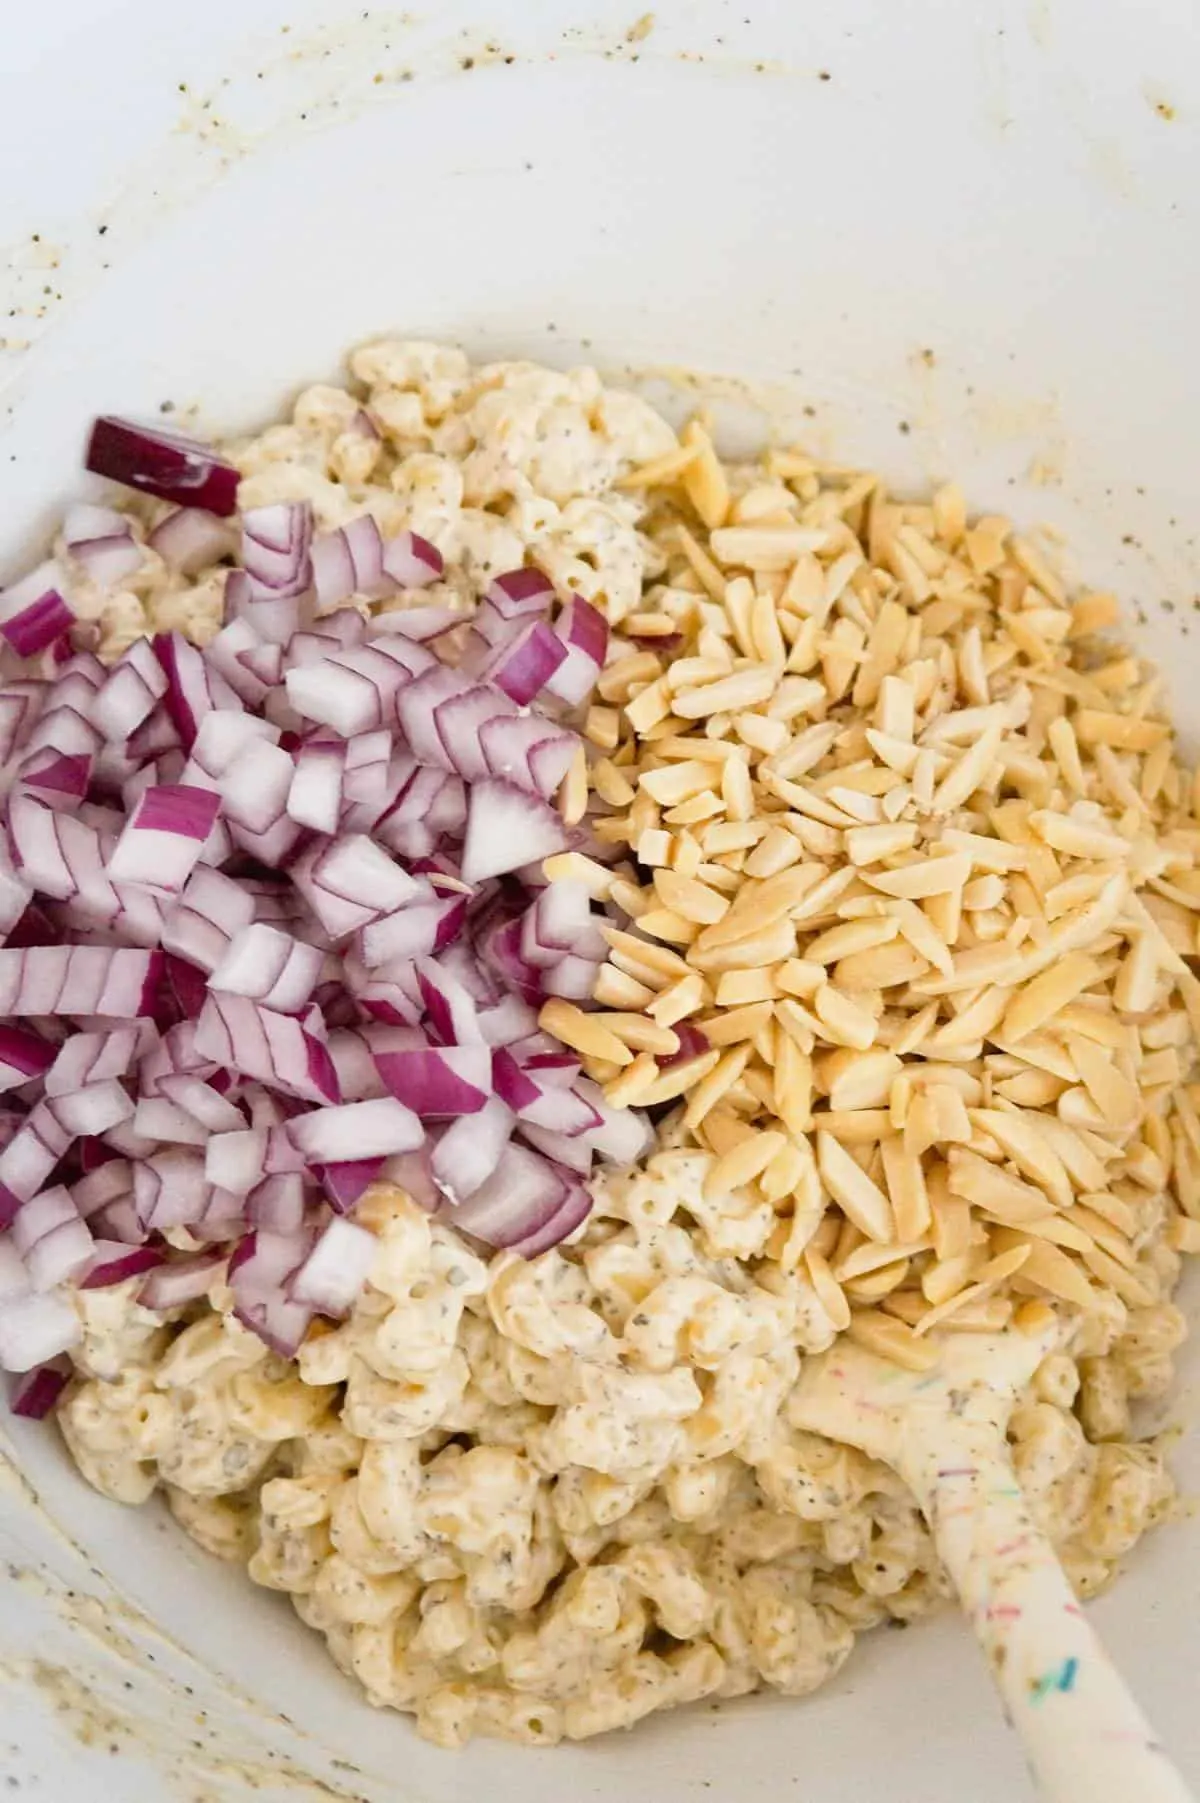 diced red onions and slivered almonds on top of macaroni salad in a mixing bowl